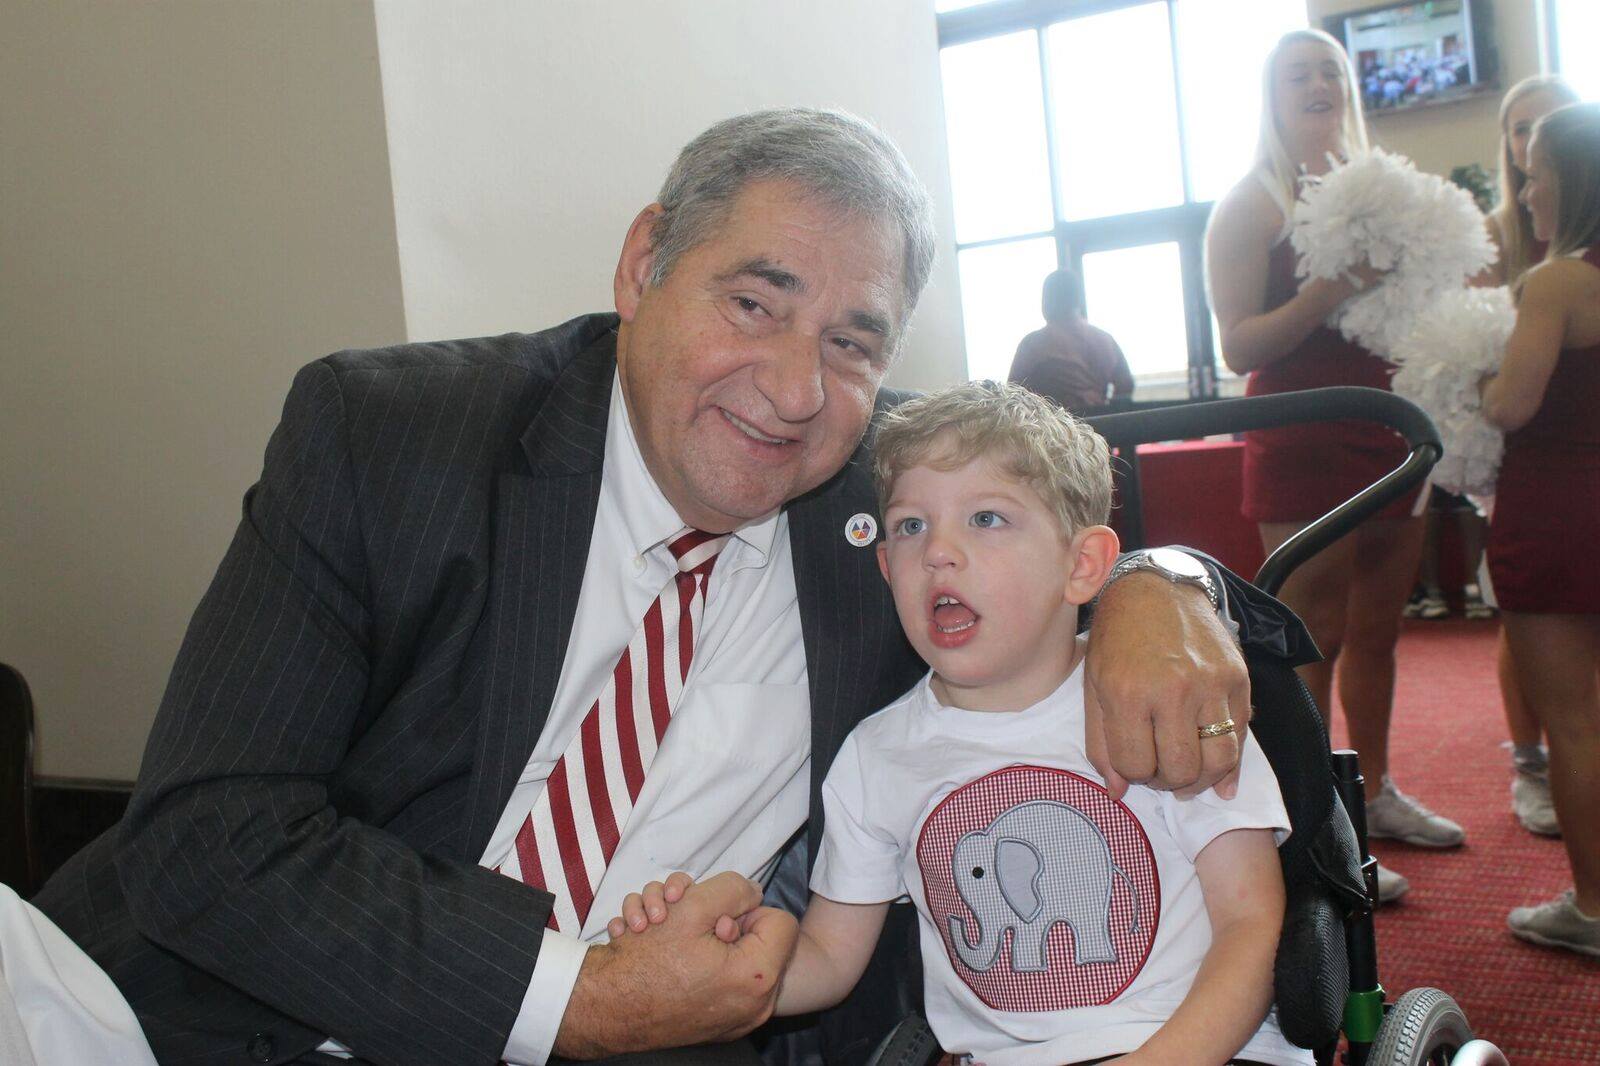 United ability employee and young boy at an Alabama event